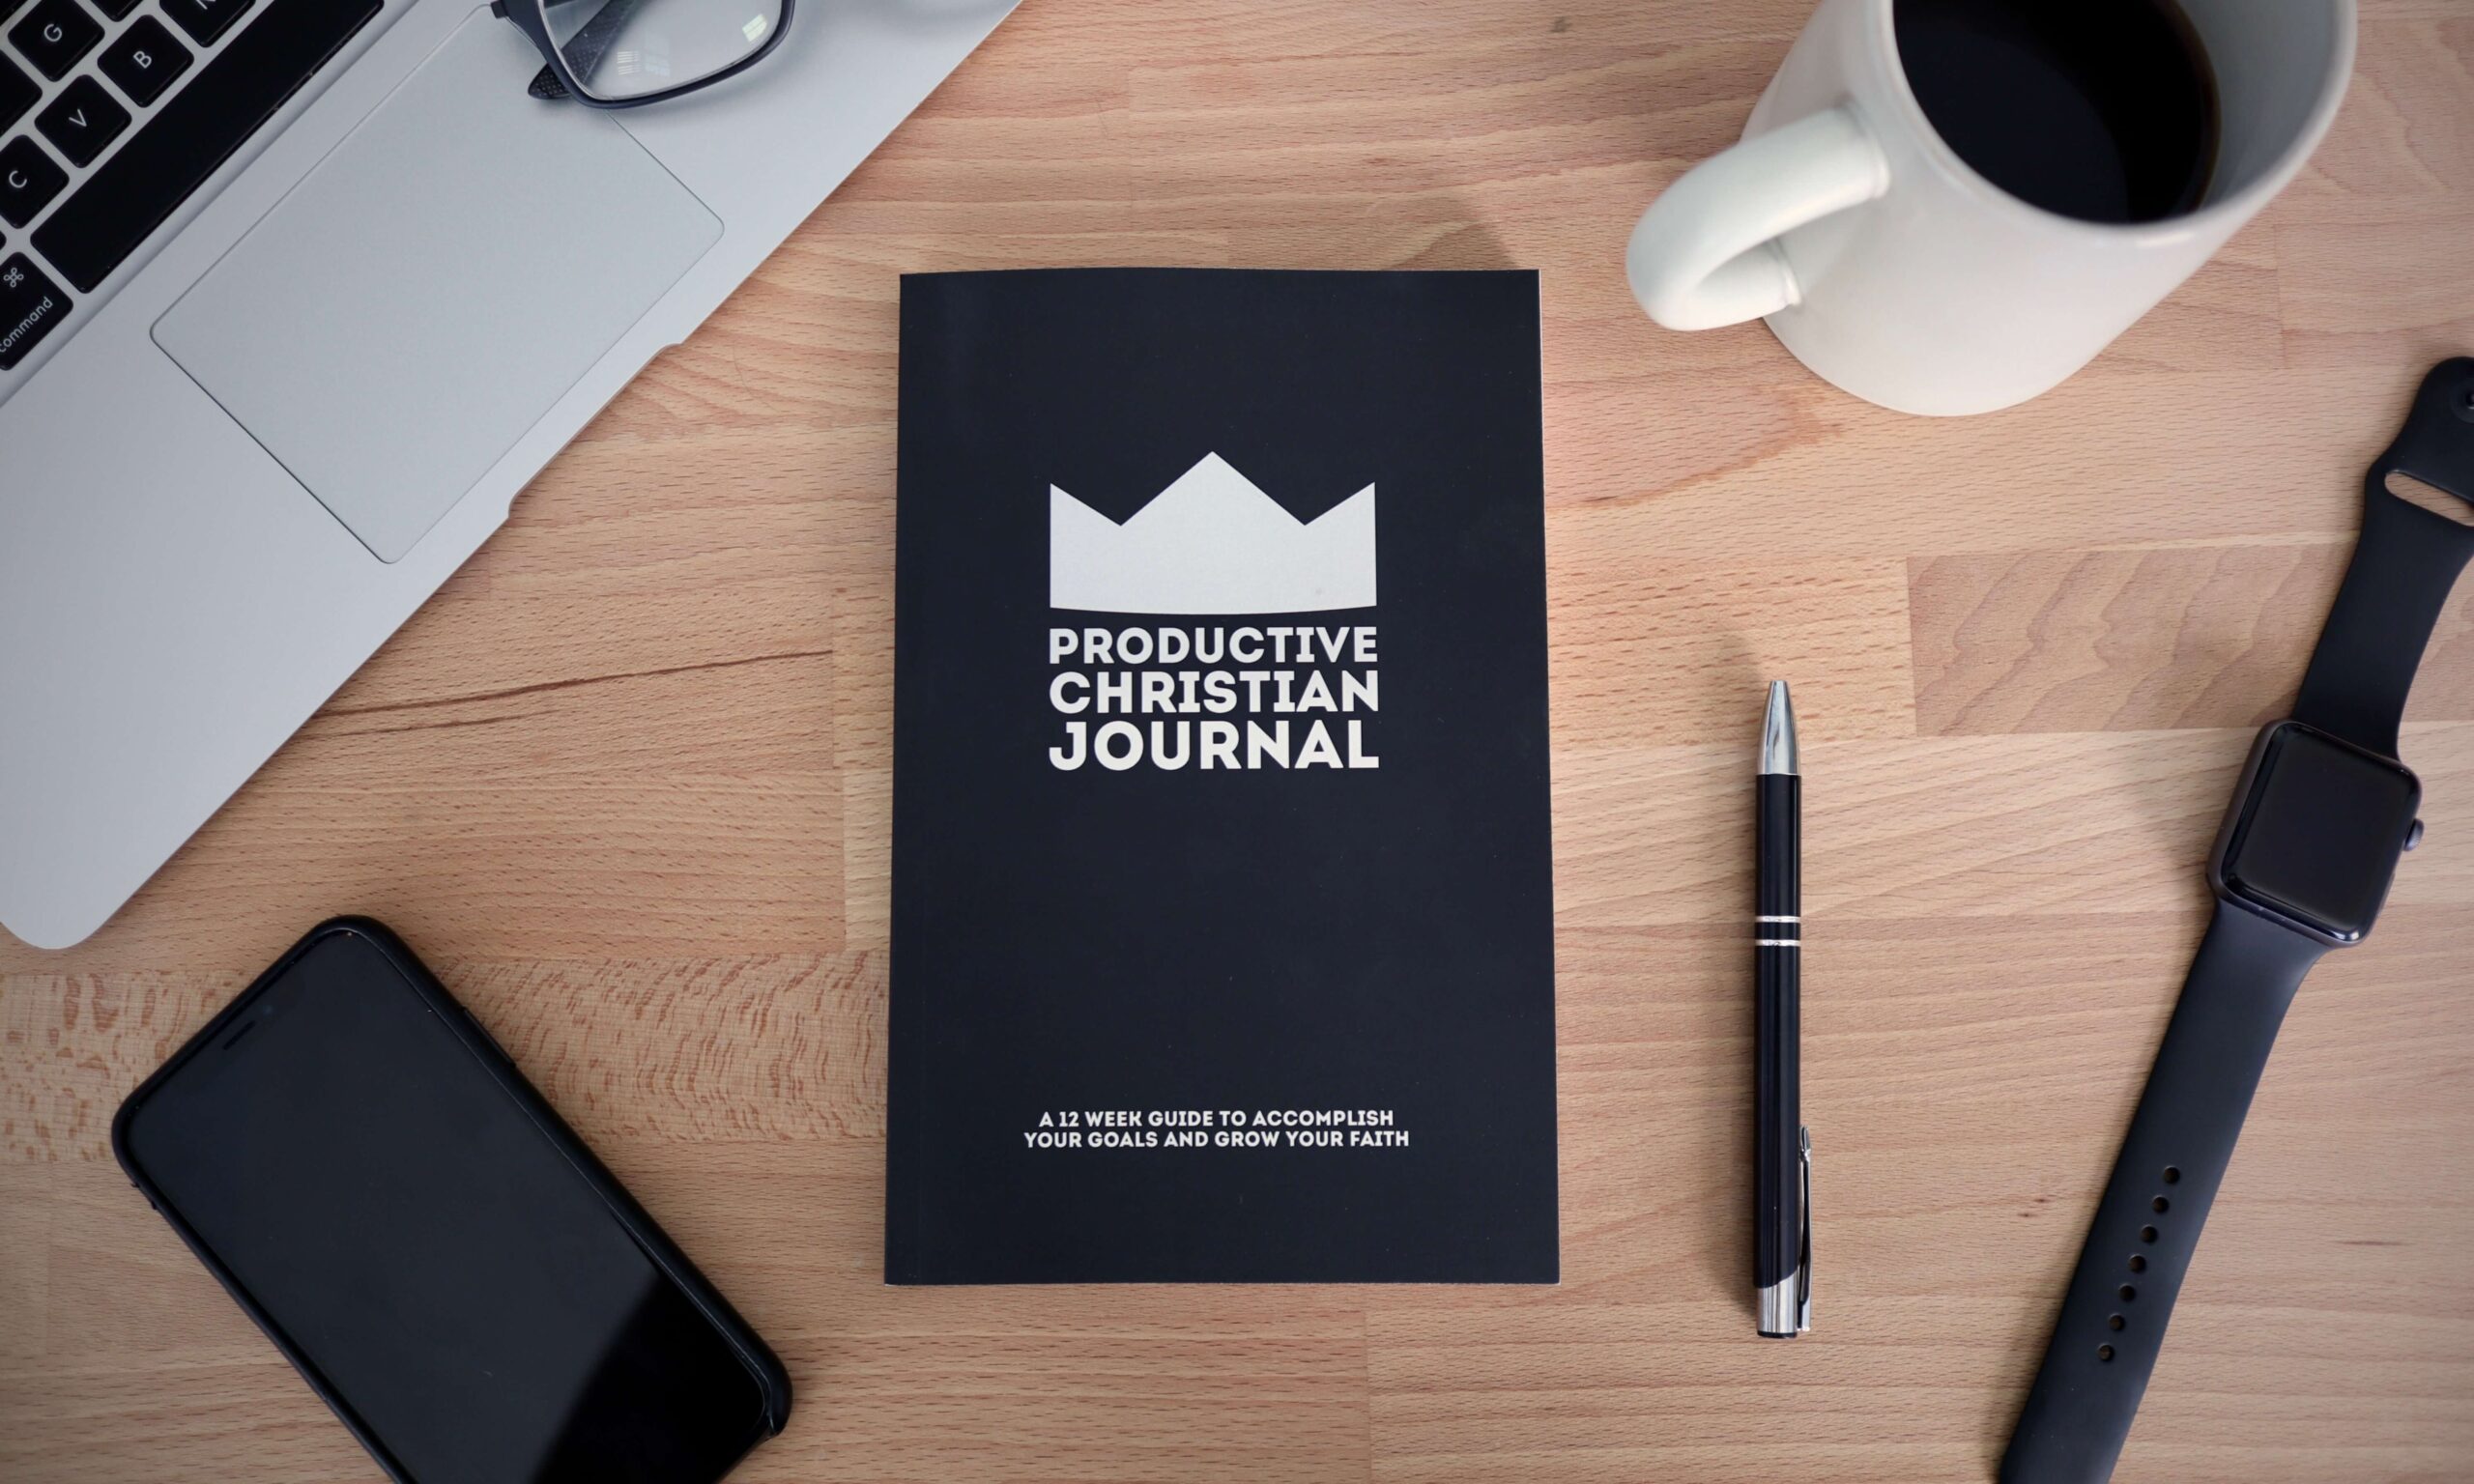 Introducing the Productive Christian Journal